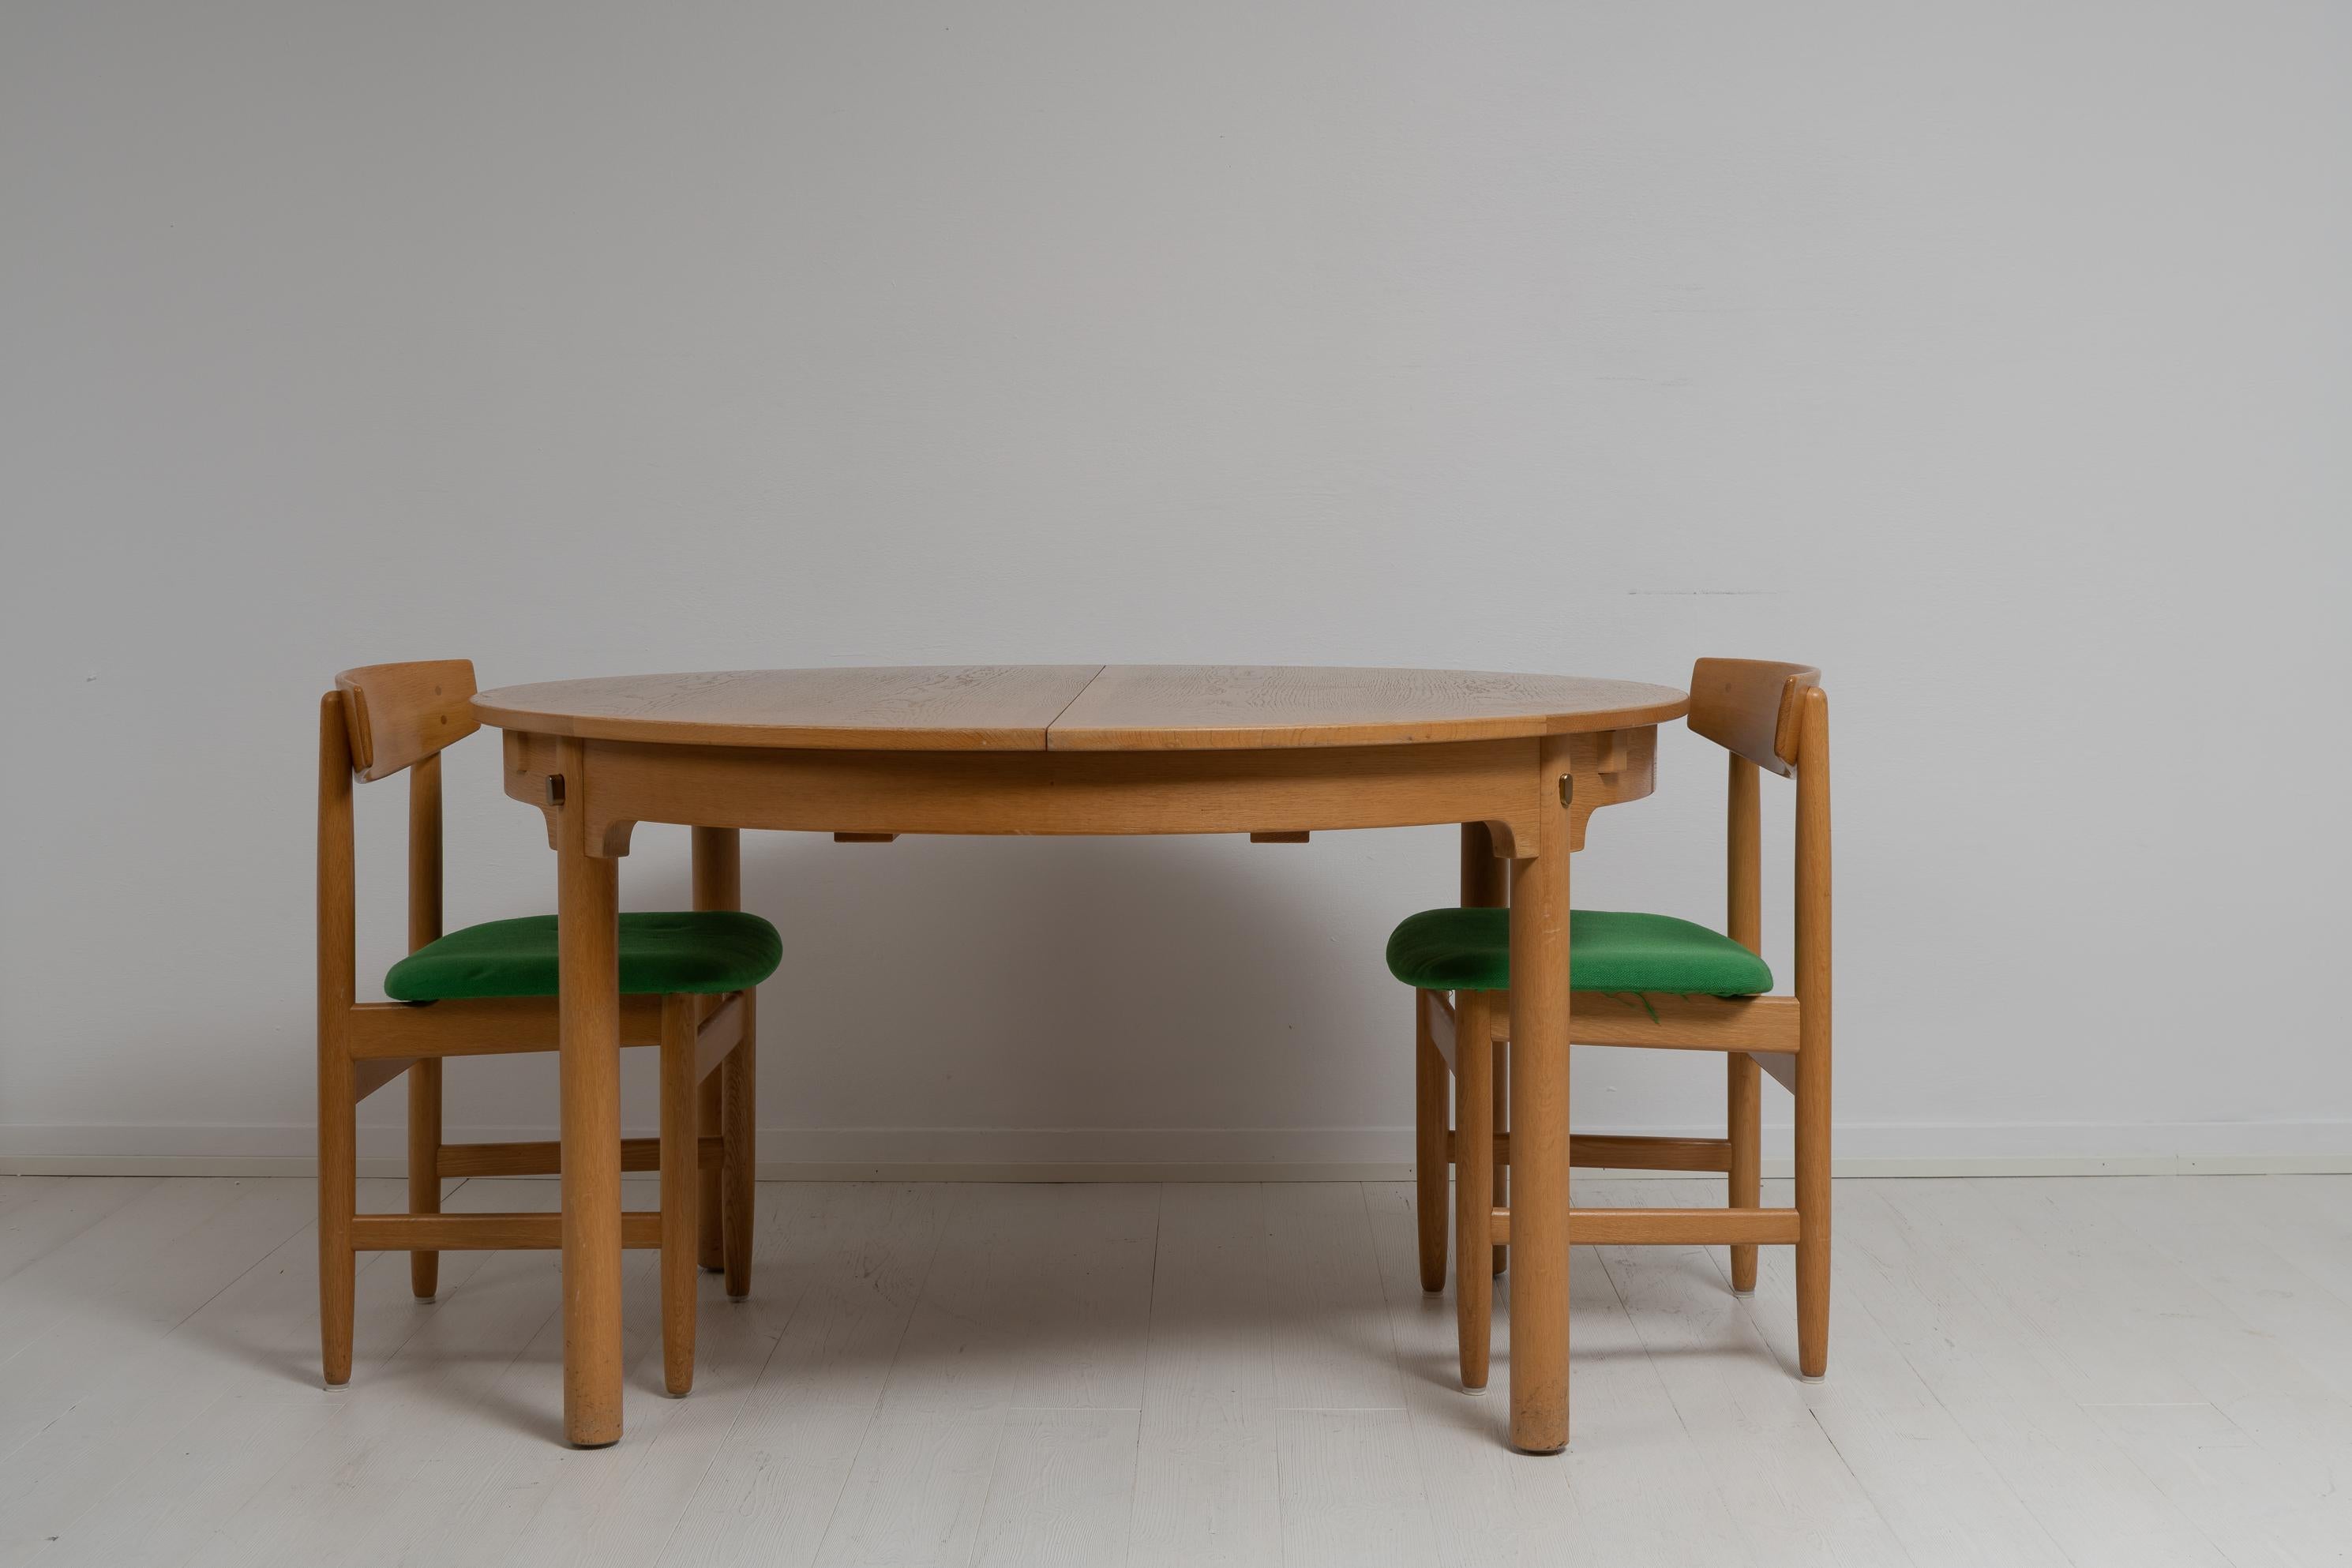 Øresund large round dining table designed by Børge Mogensen and made by Karl Andersson & Söner. The large dining table is in oak and made in Sweden around the mid-20th century, 1950 to 1960. The table is subtly but unmistakably Scandinavian modern